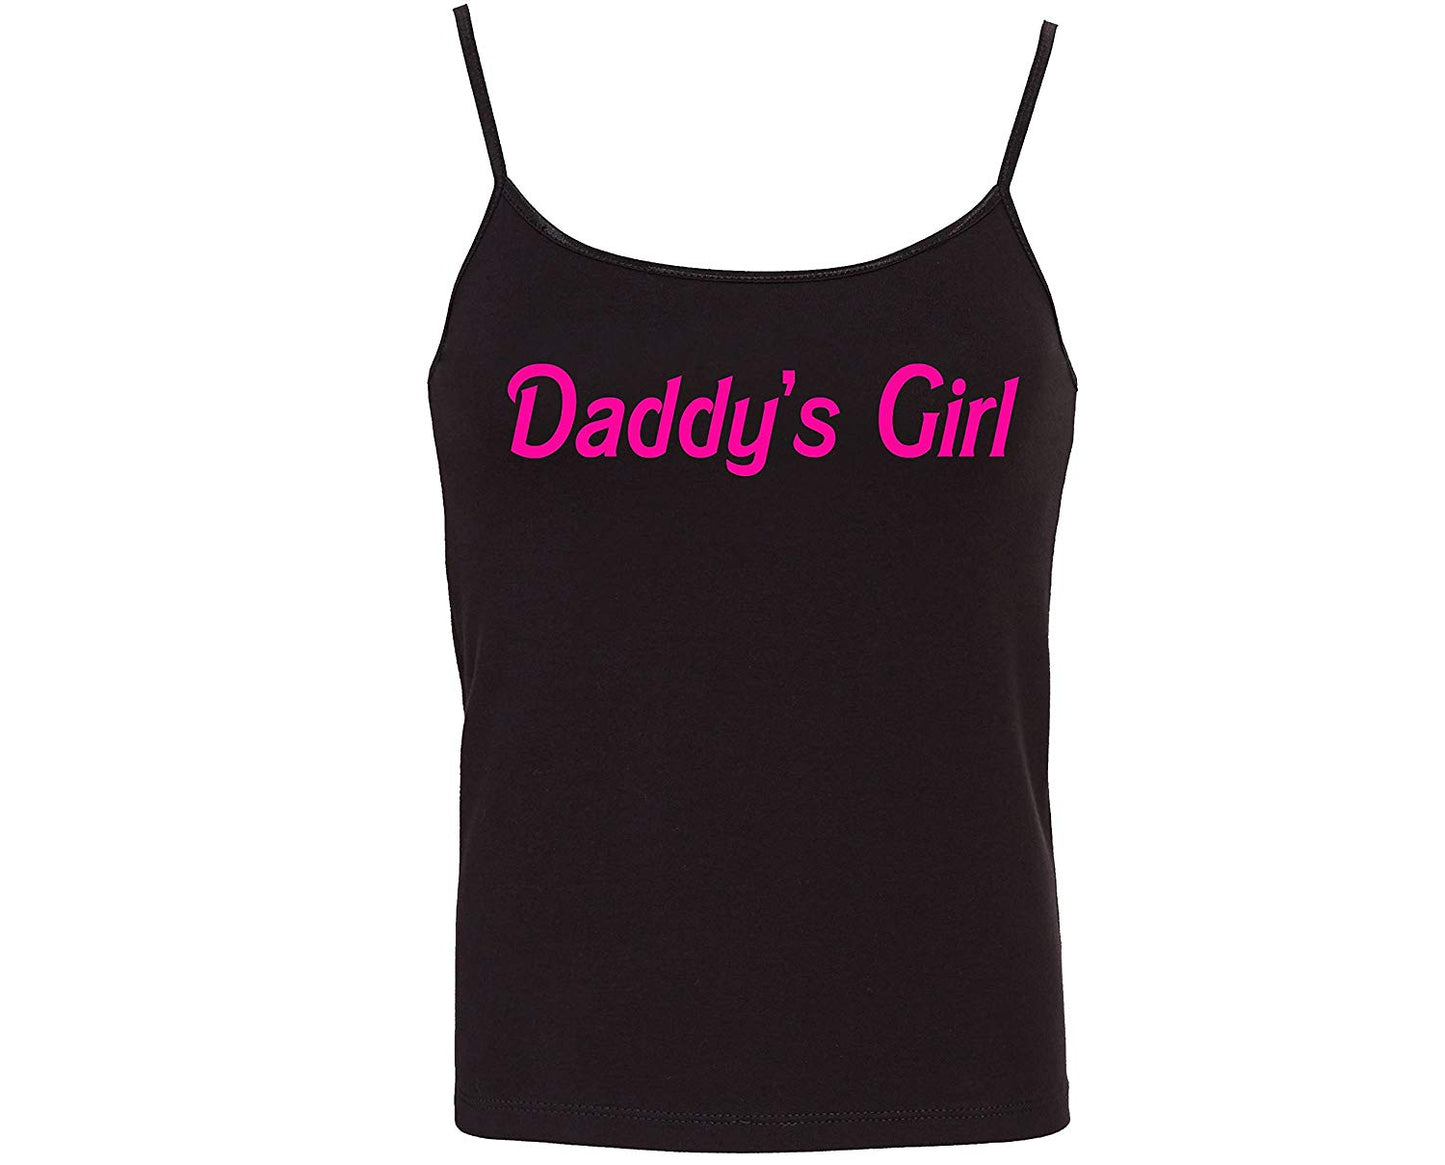 Knaughty Knickers Daddy's Girl Black Hot Pink Daddy's Little Slut DDLG Camisole Cami Sexy Tank Top